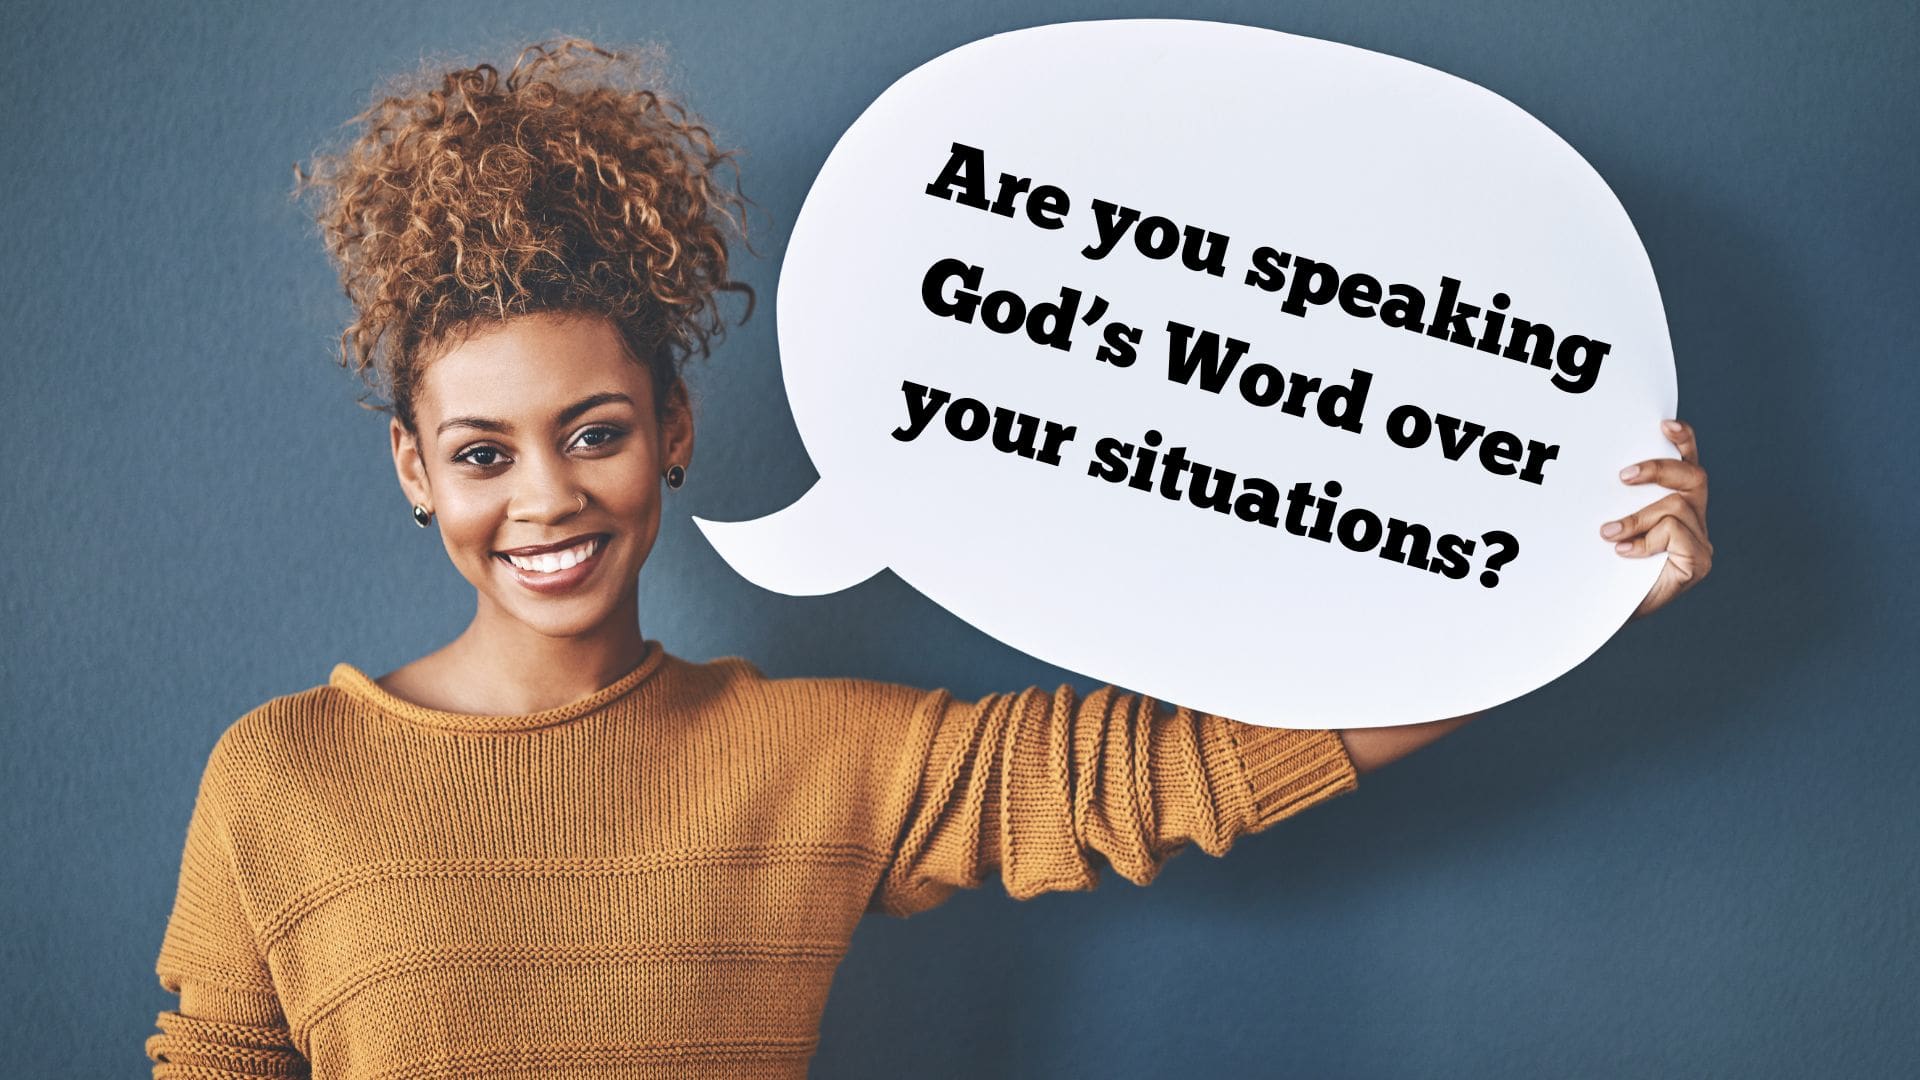 Empowering Your Voice: Speaking God’s Word